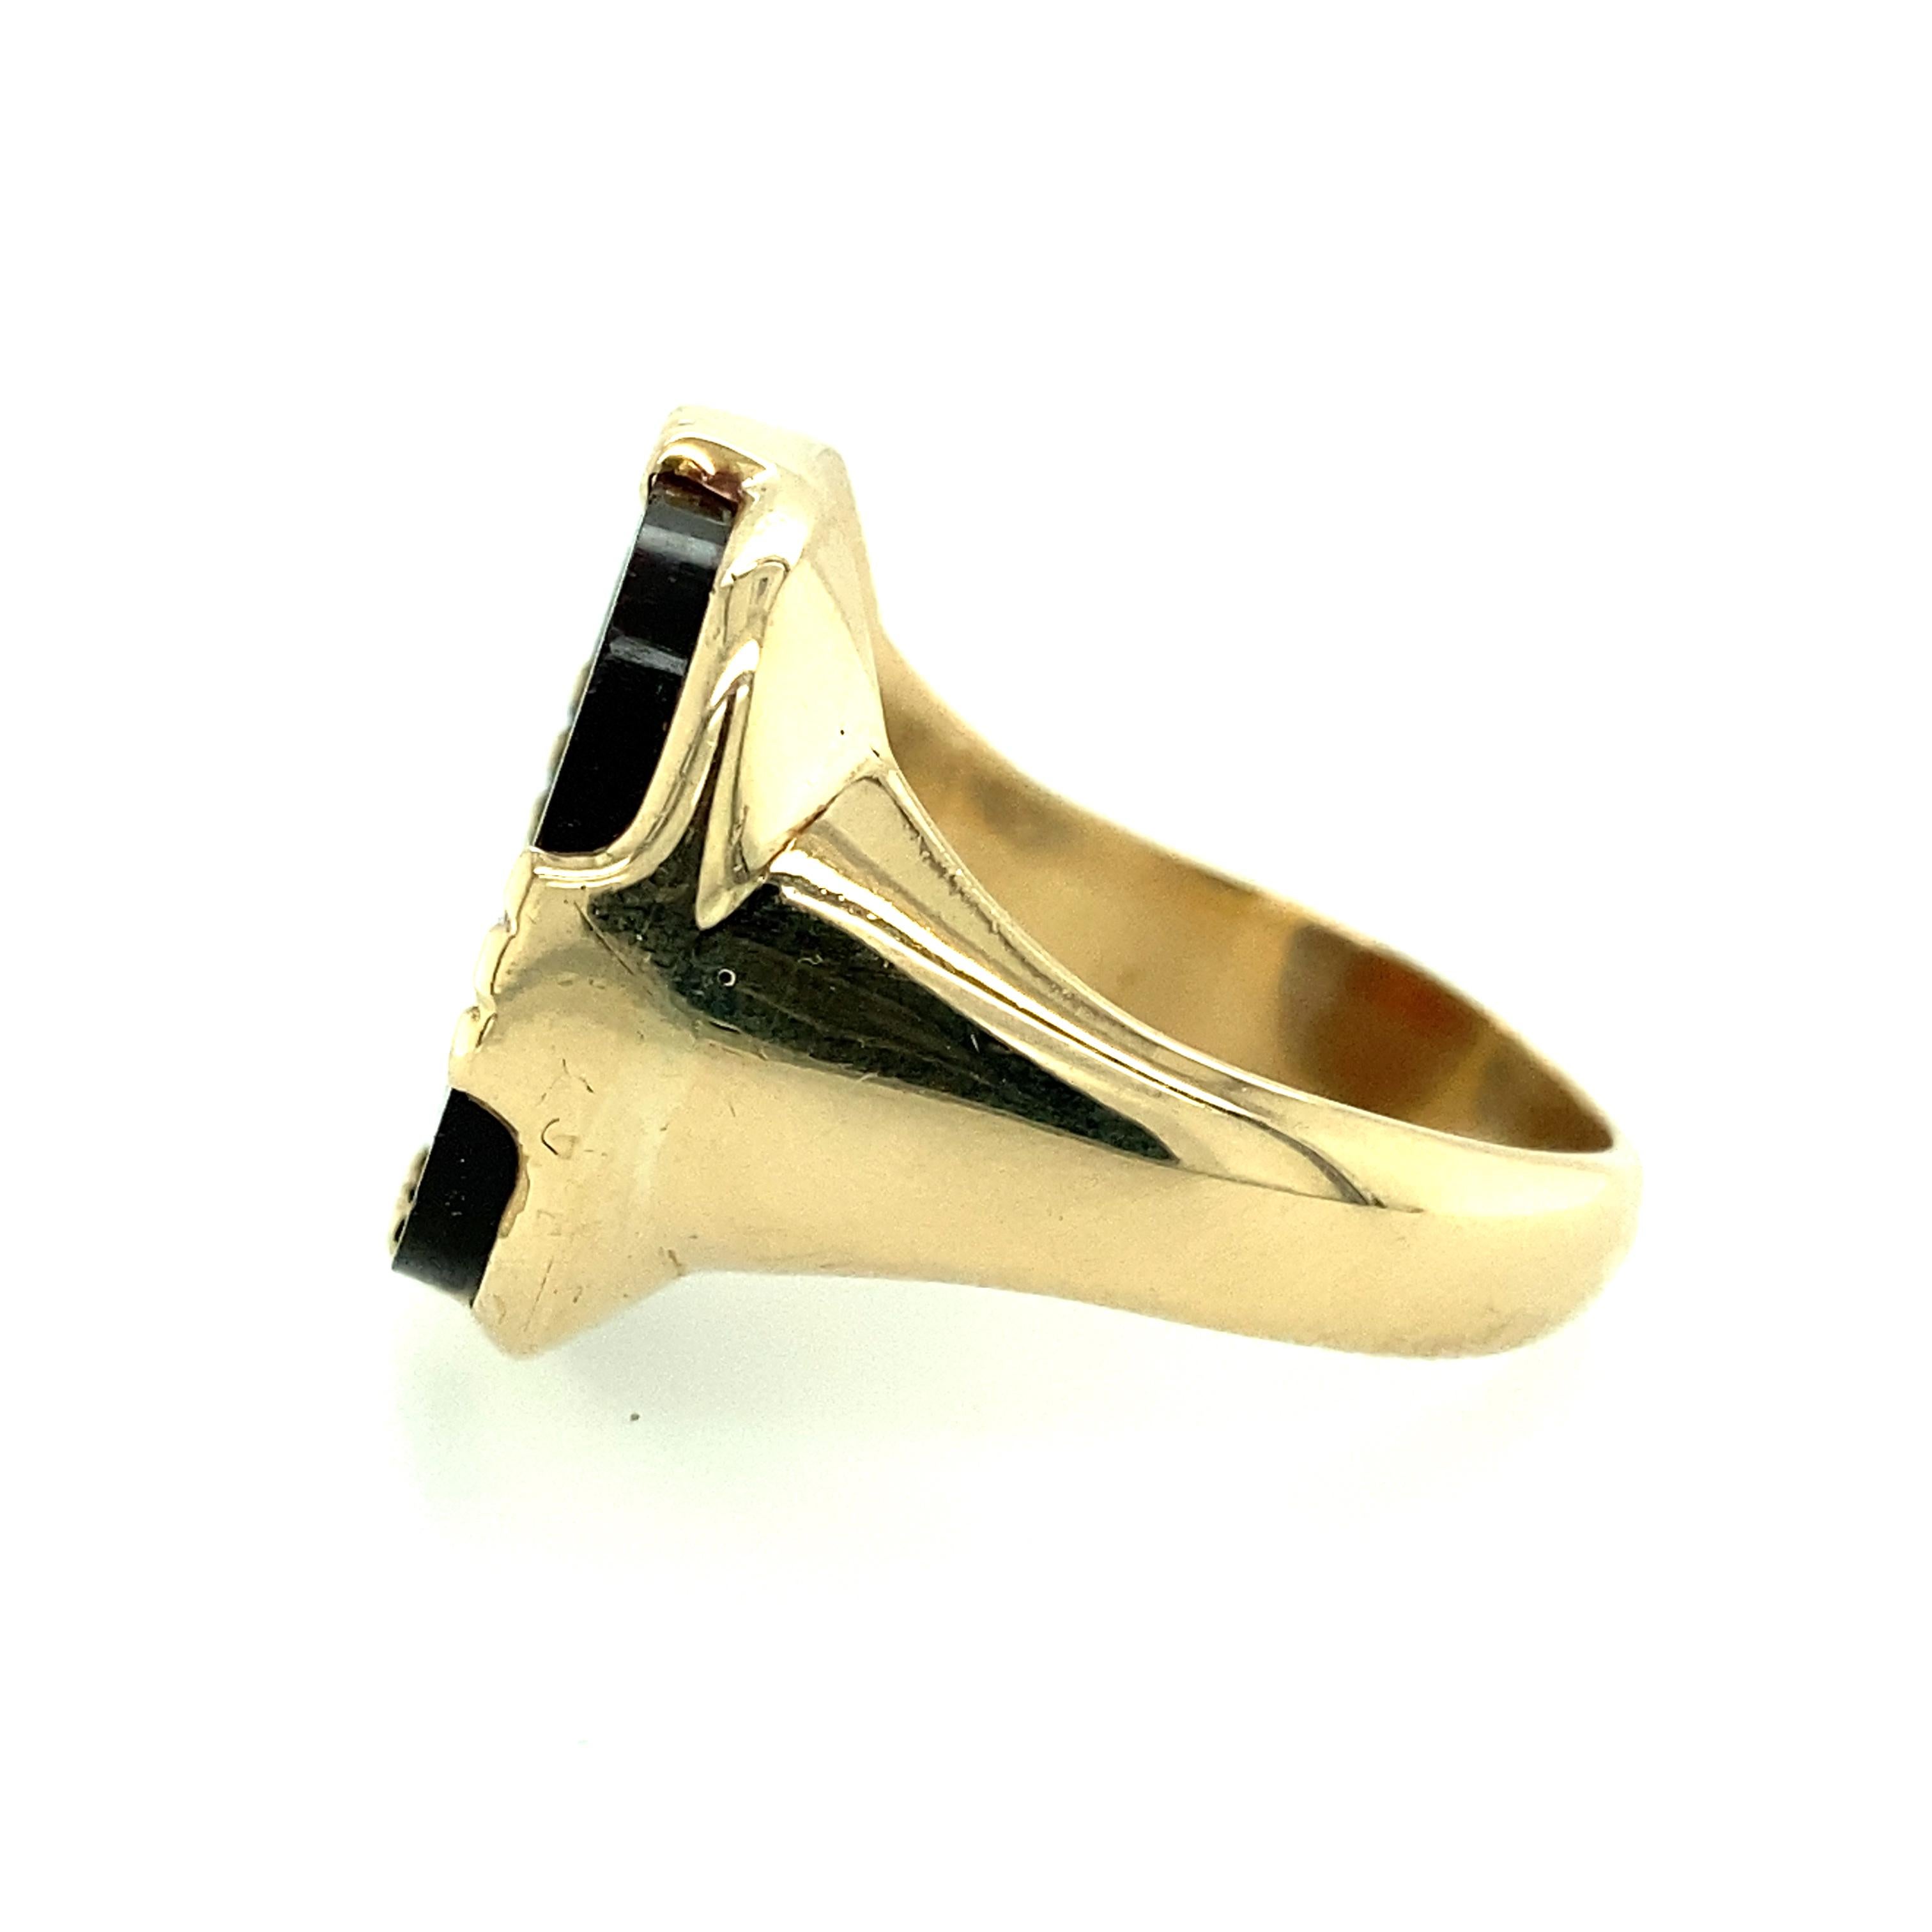 One 14 karat yellow gold estate sardonyx intaglio ring with male and female carving. The top of the ring measures 0.75x 1 inch and weighs 11.66 grams.  The shank measures 8.55mm near the top of the ring and tapers to 3.6mm at the base.  Finger size